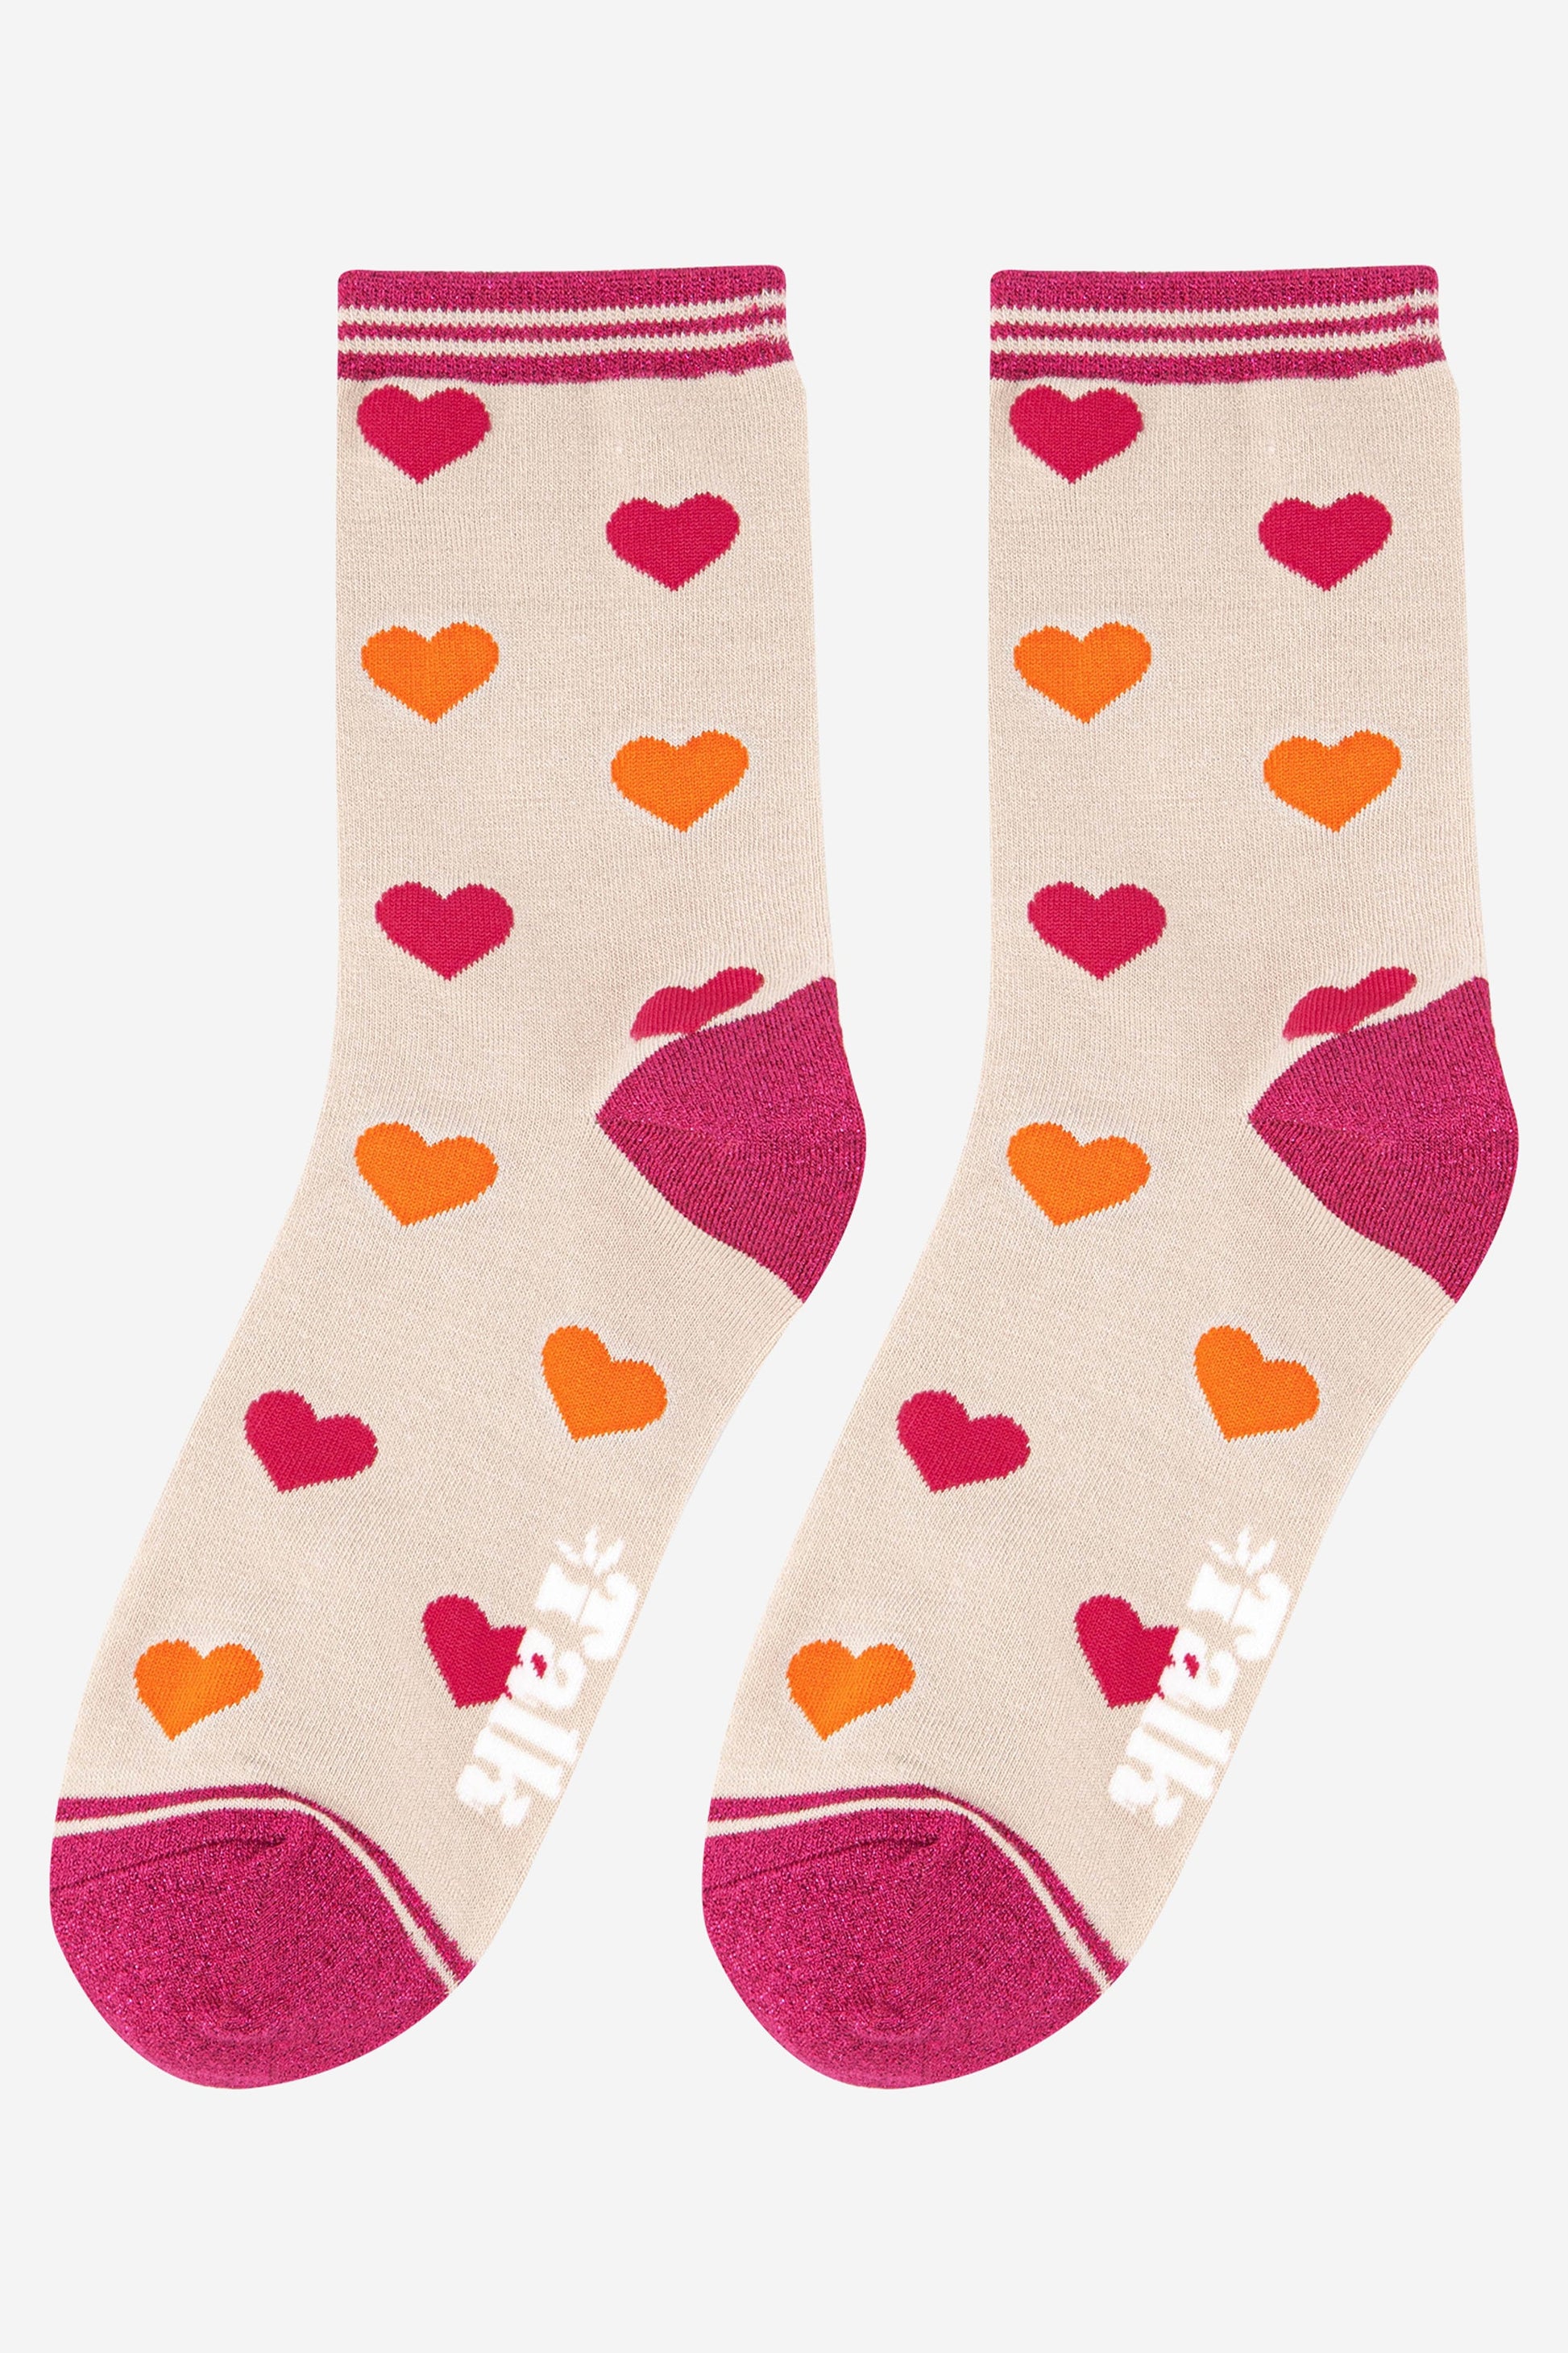 women's love heart print bamboo ankle socks with a glitter heel, toe and cuff. 